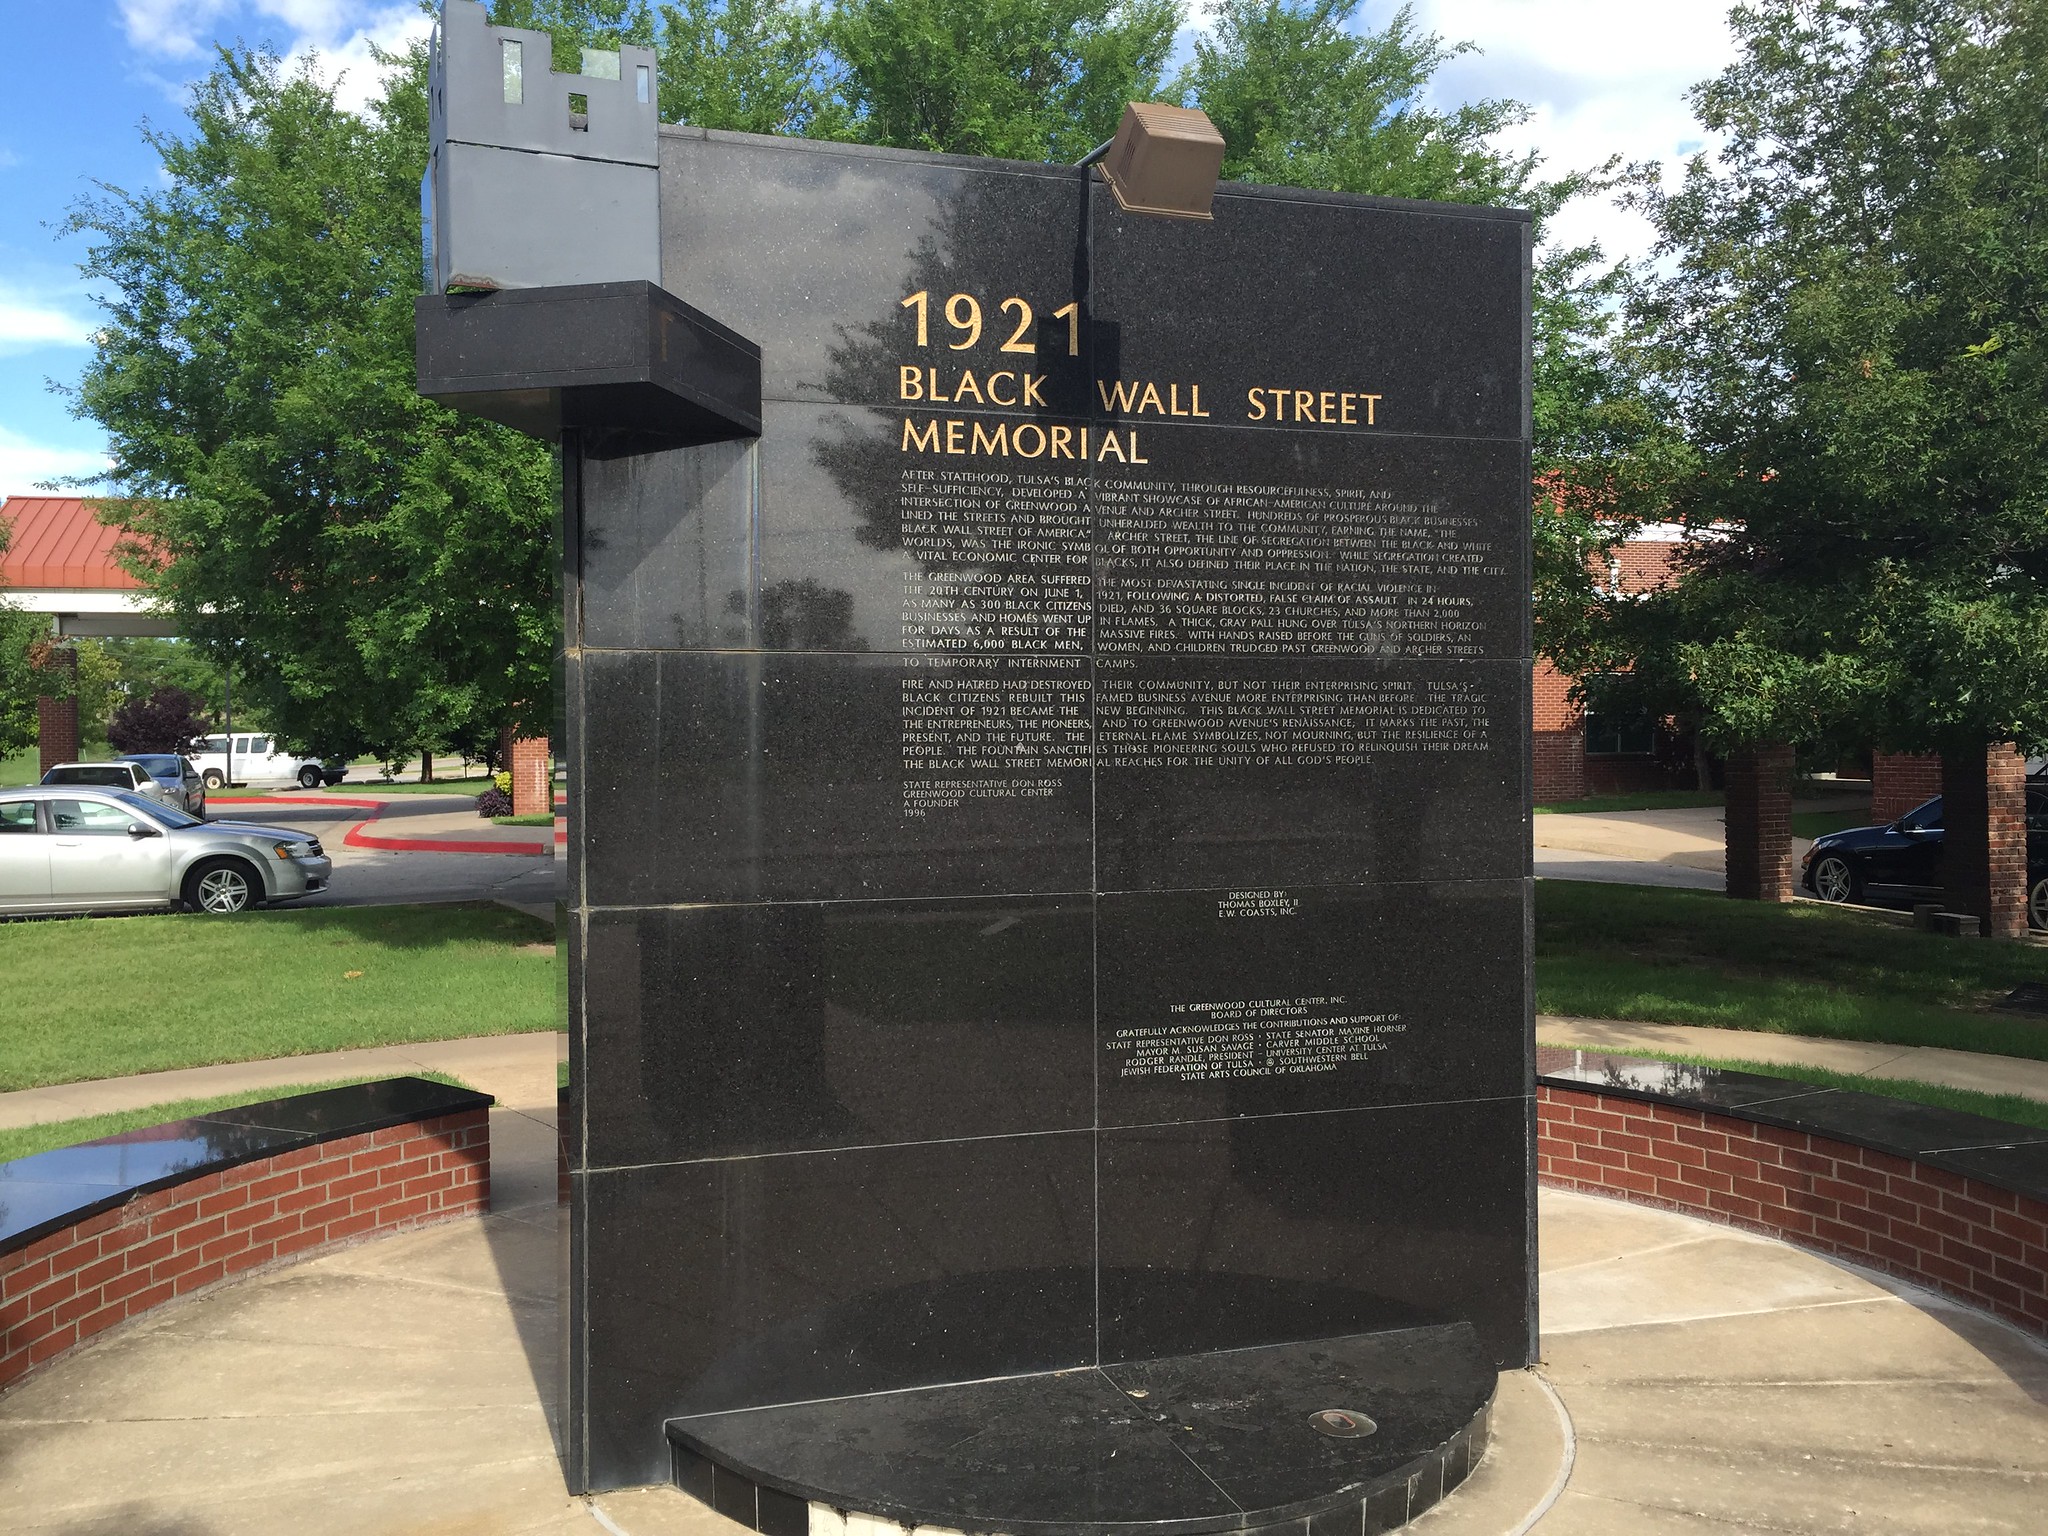 a photo of a commemorative monument in Tulsa on Black Wall Street, site of the Tulsa Race Massacre